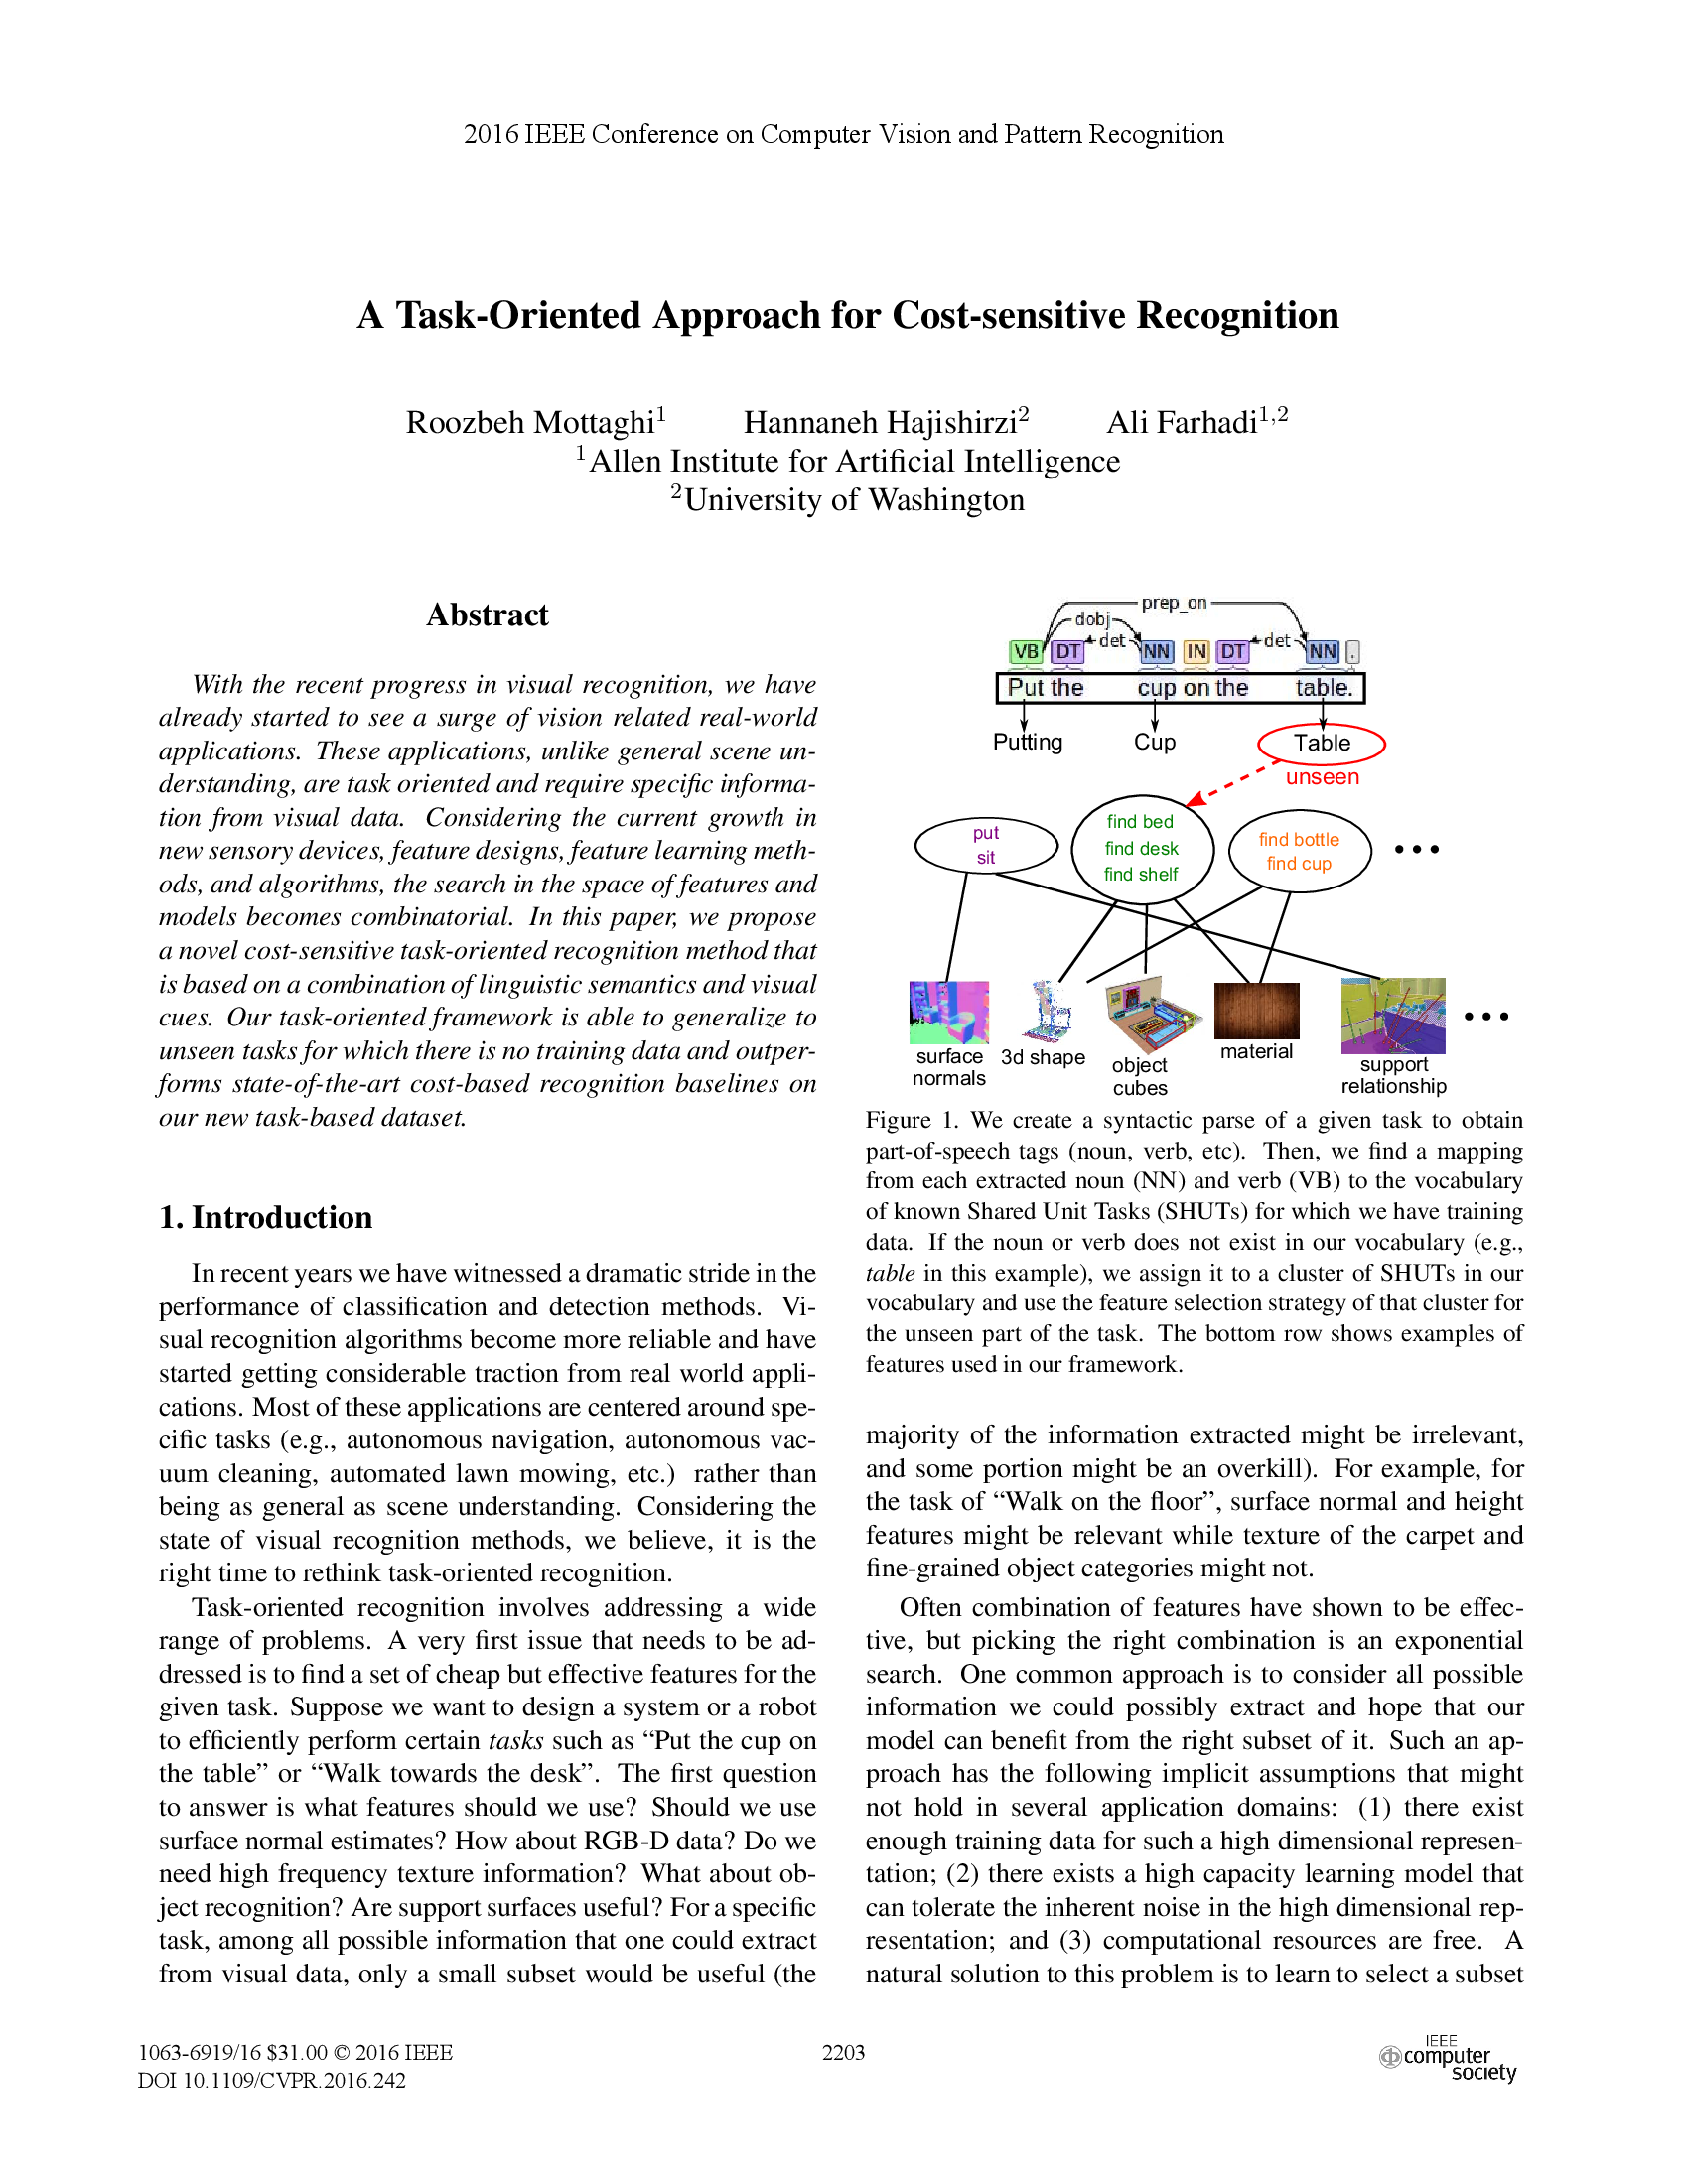 A Task-Oriented Approach for Cost-Sensitive Recognition